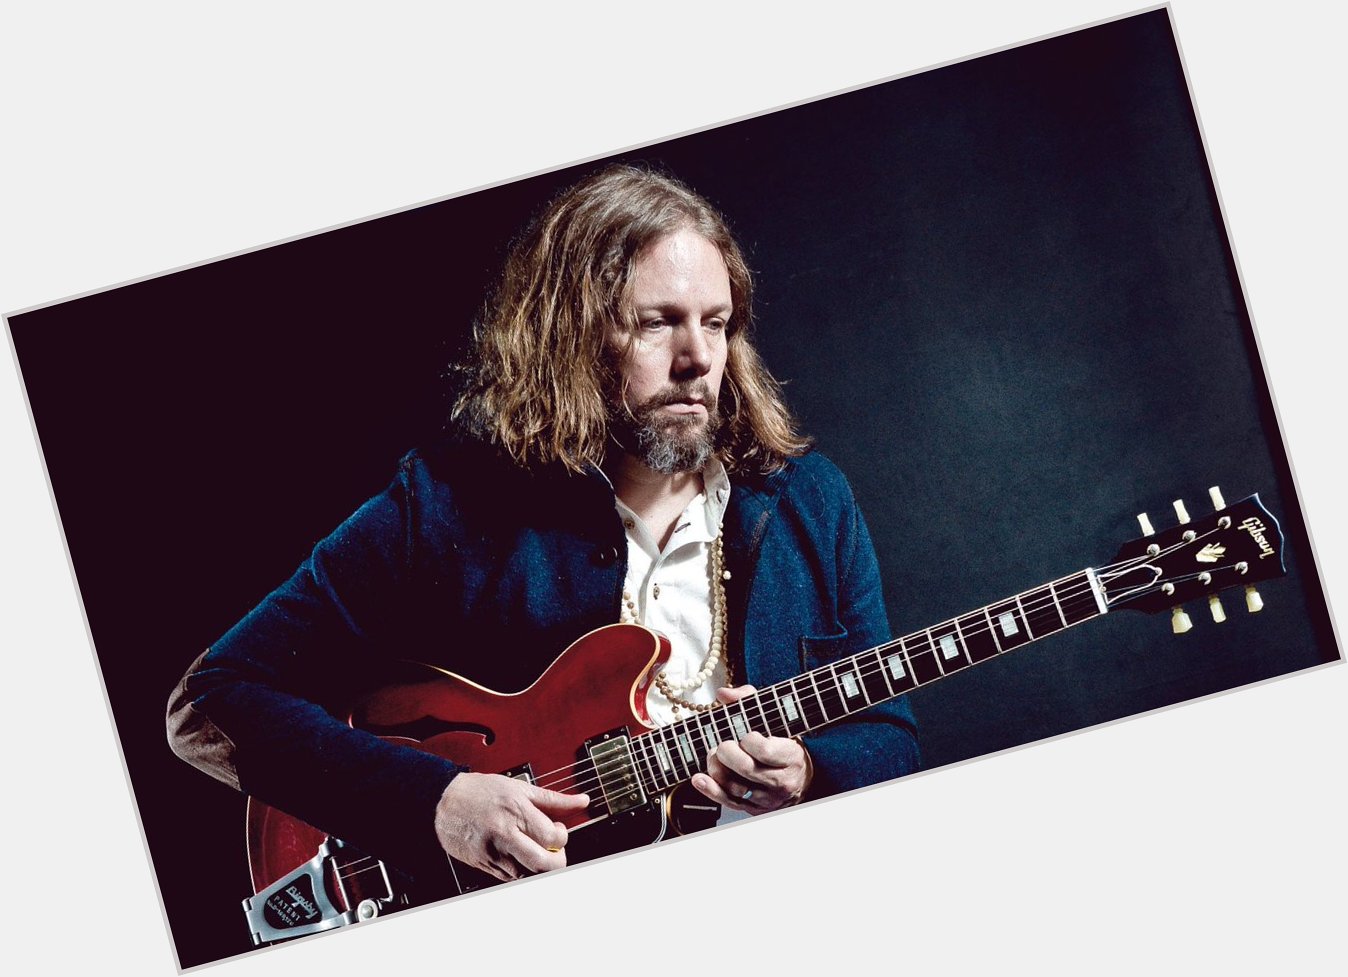 Happy birthday to Rich Robinson of the Black Crowes. 